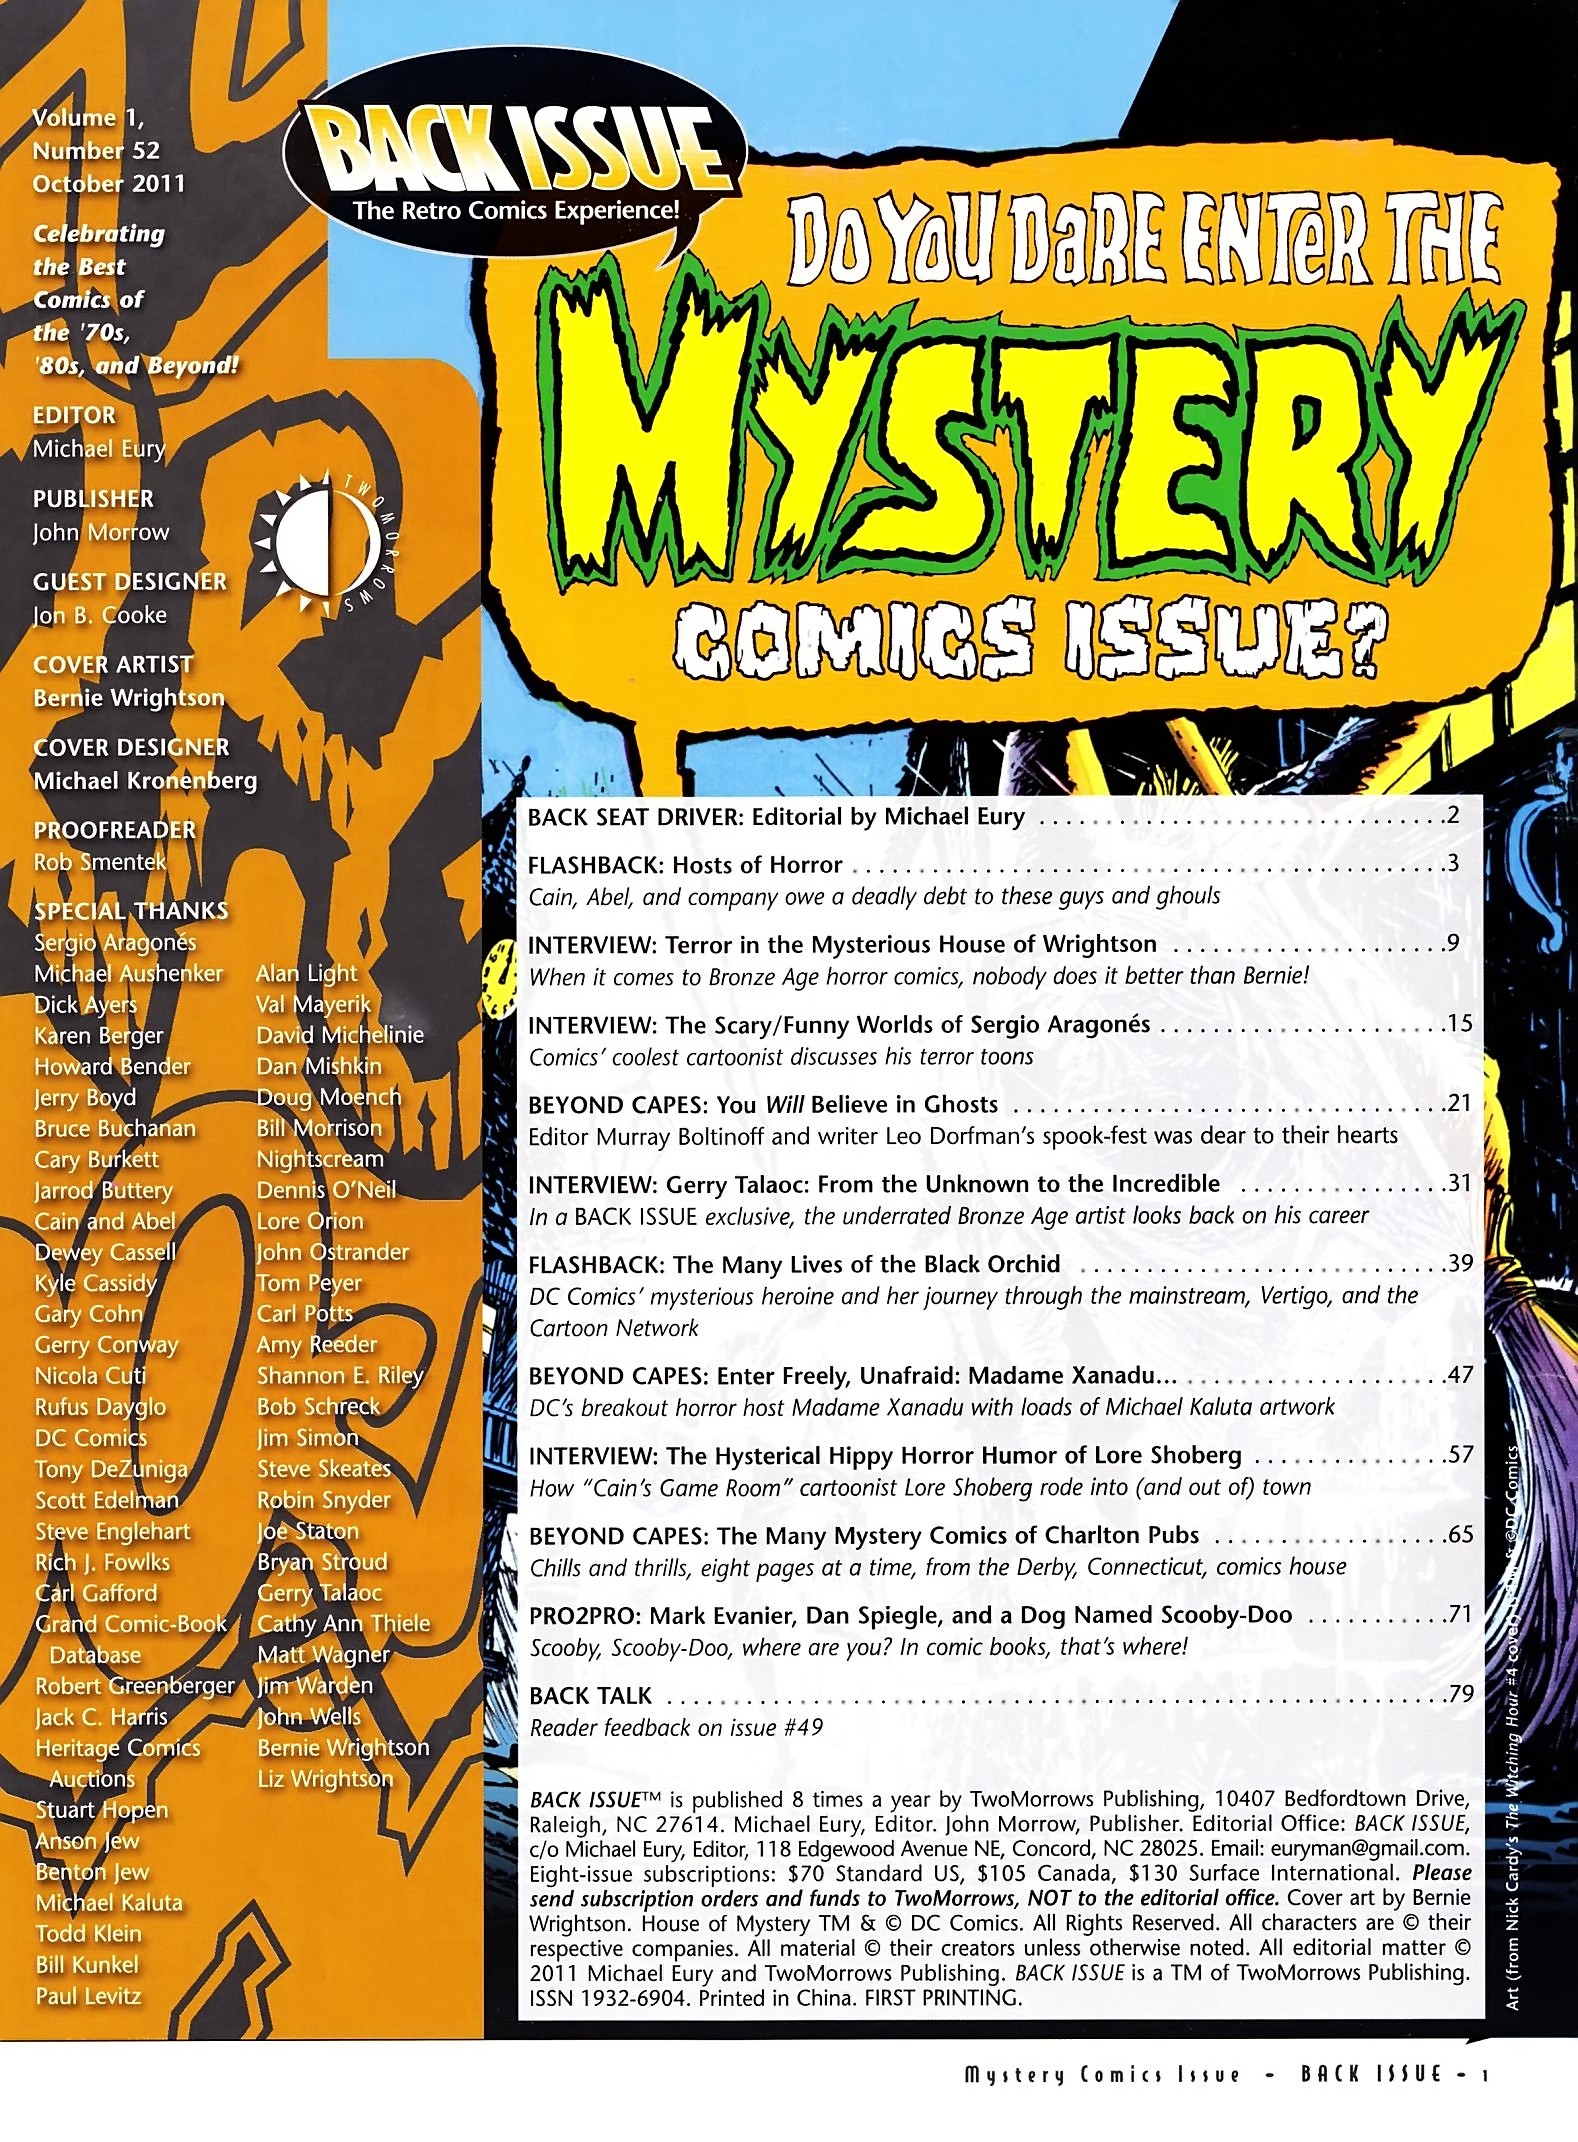 Read online Back Issue comic -  Issue #52 - 3